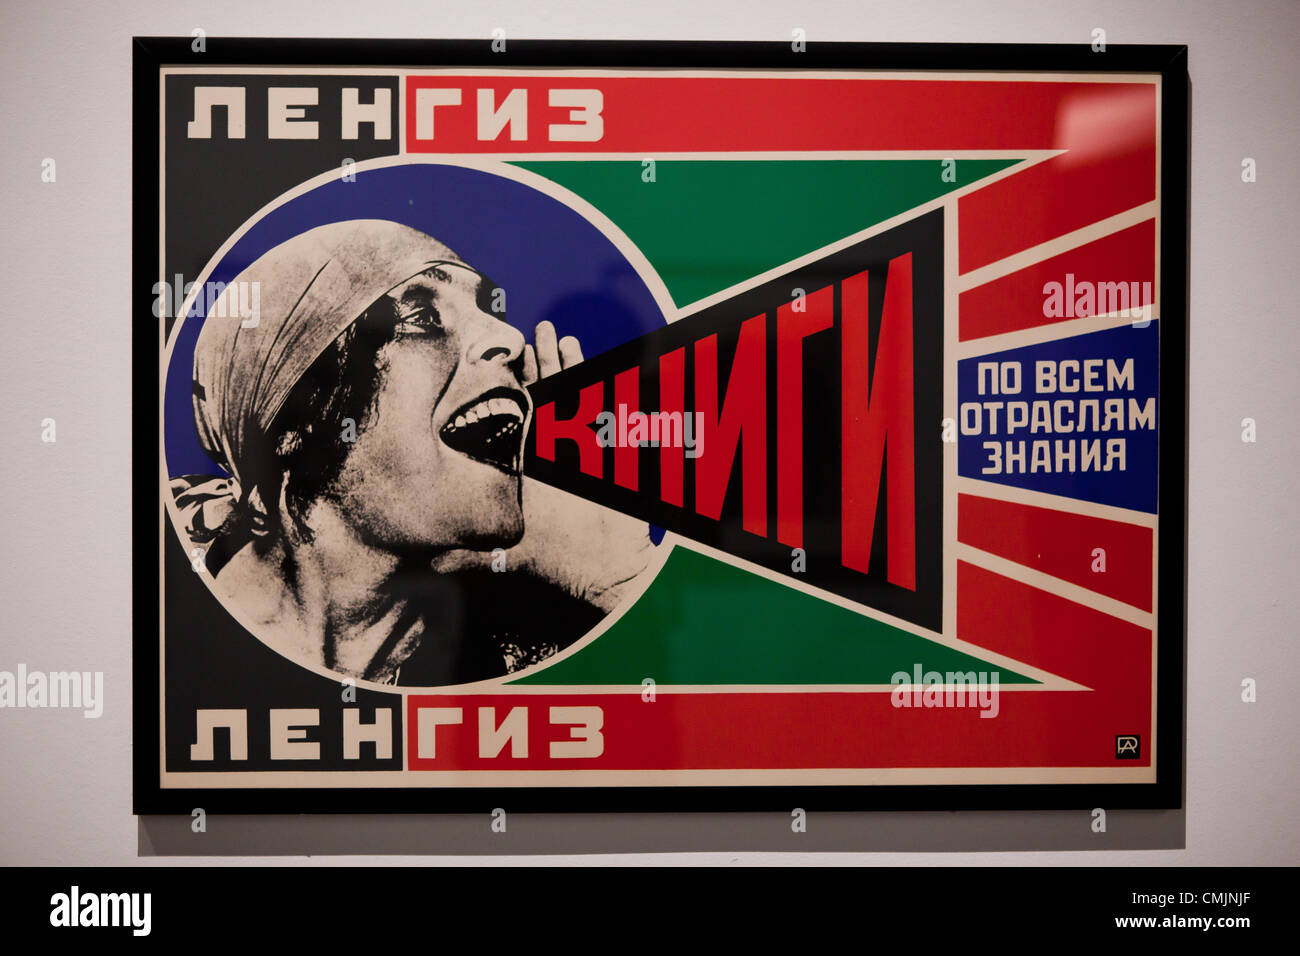 August 17, 2012 Cracow, Poland - Alexander Rodchenko. Revolution in Photography in The National Museum in Krakow. The coming weekend is the closing weekend of exhibition of Alexander Rodchenko (1891–1956), one of the most influential 20th-century artists, a star of the Russian avant-garde and classic of the modern photography. The National Museum in Krakow, jointly with the Moscow House of Photography Museum, prepares a major presentation of the artist’s oeuvre to be shown in Poland for the first time. Stock Photo